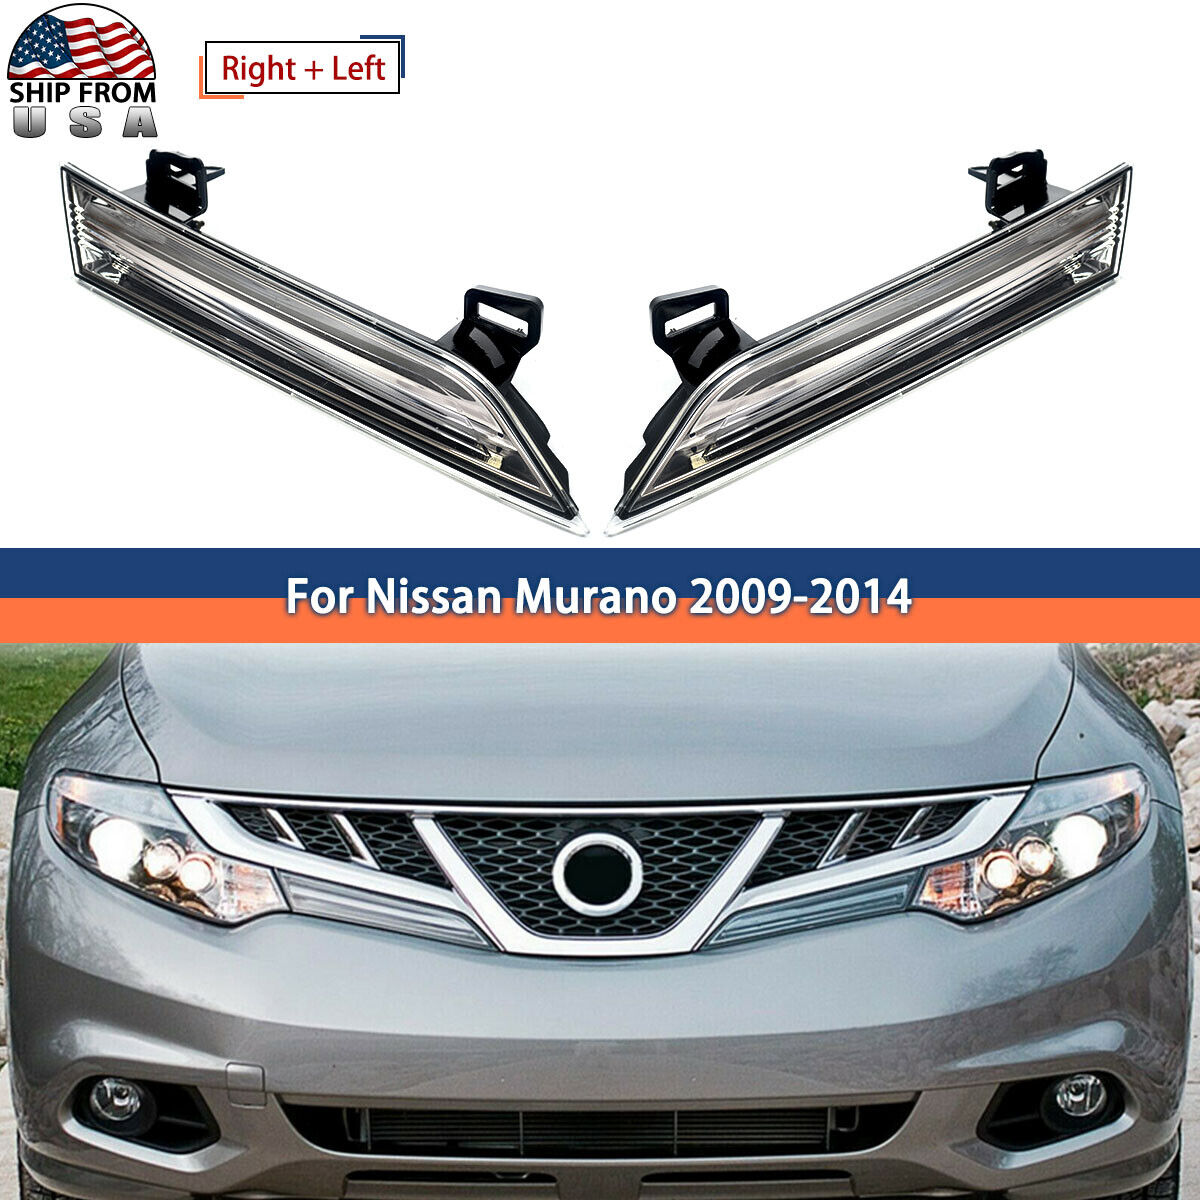 Pair For 2009-2014 Nissan Murano Right + Left Headlight Lamps Reflector Panels